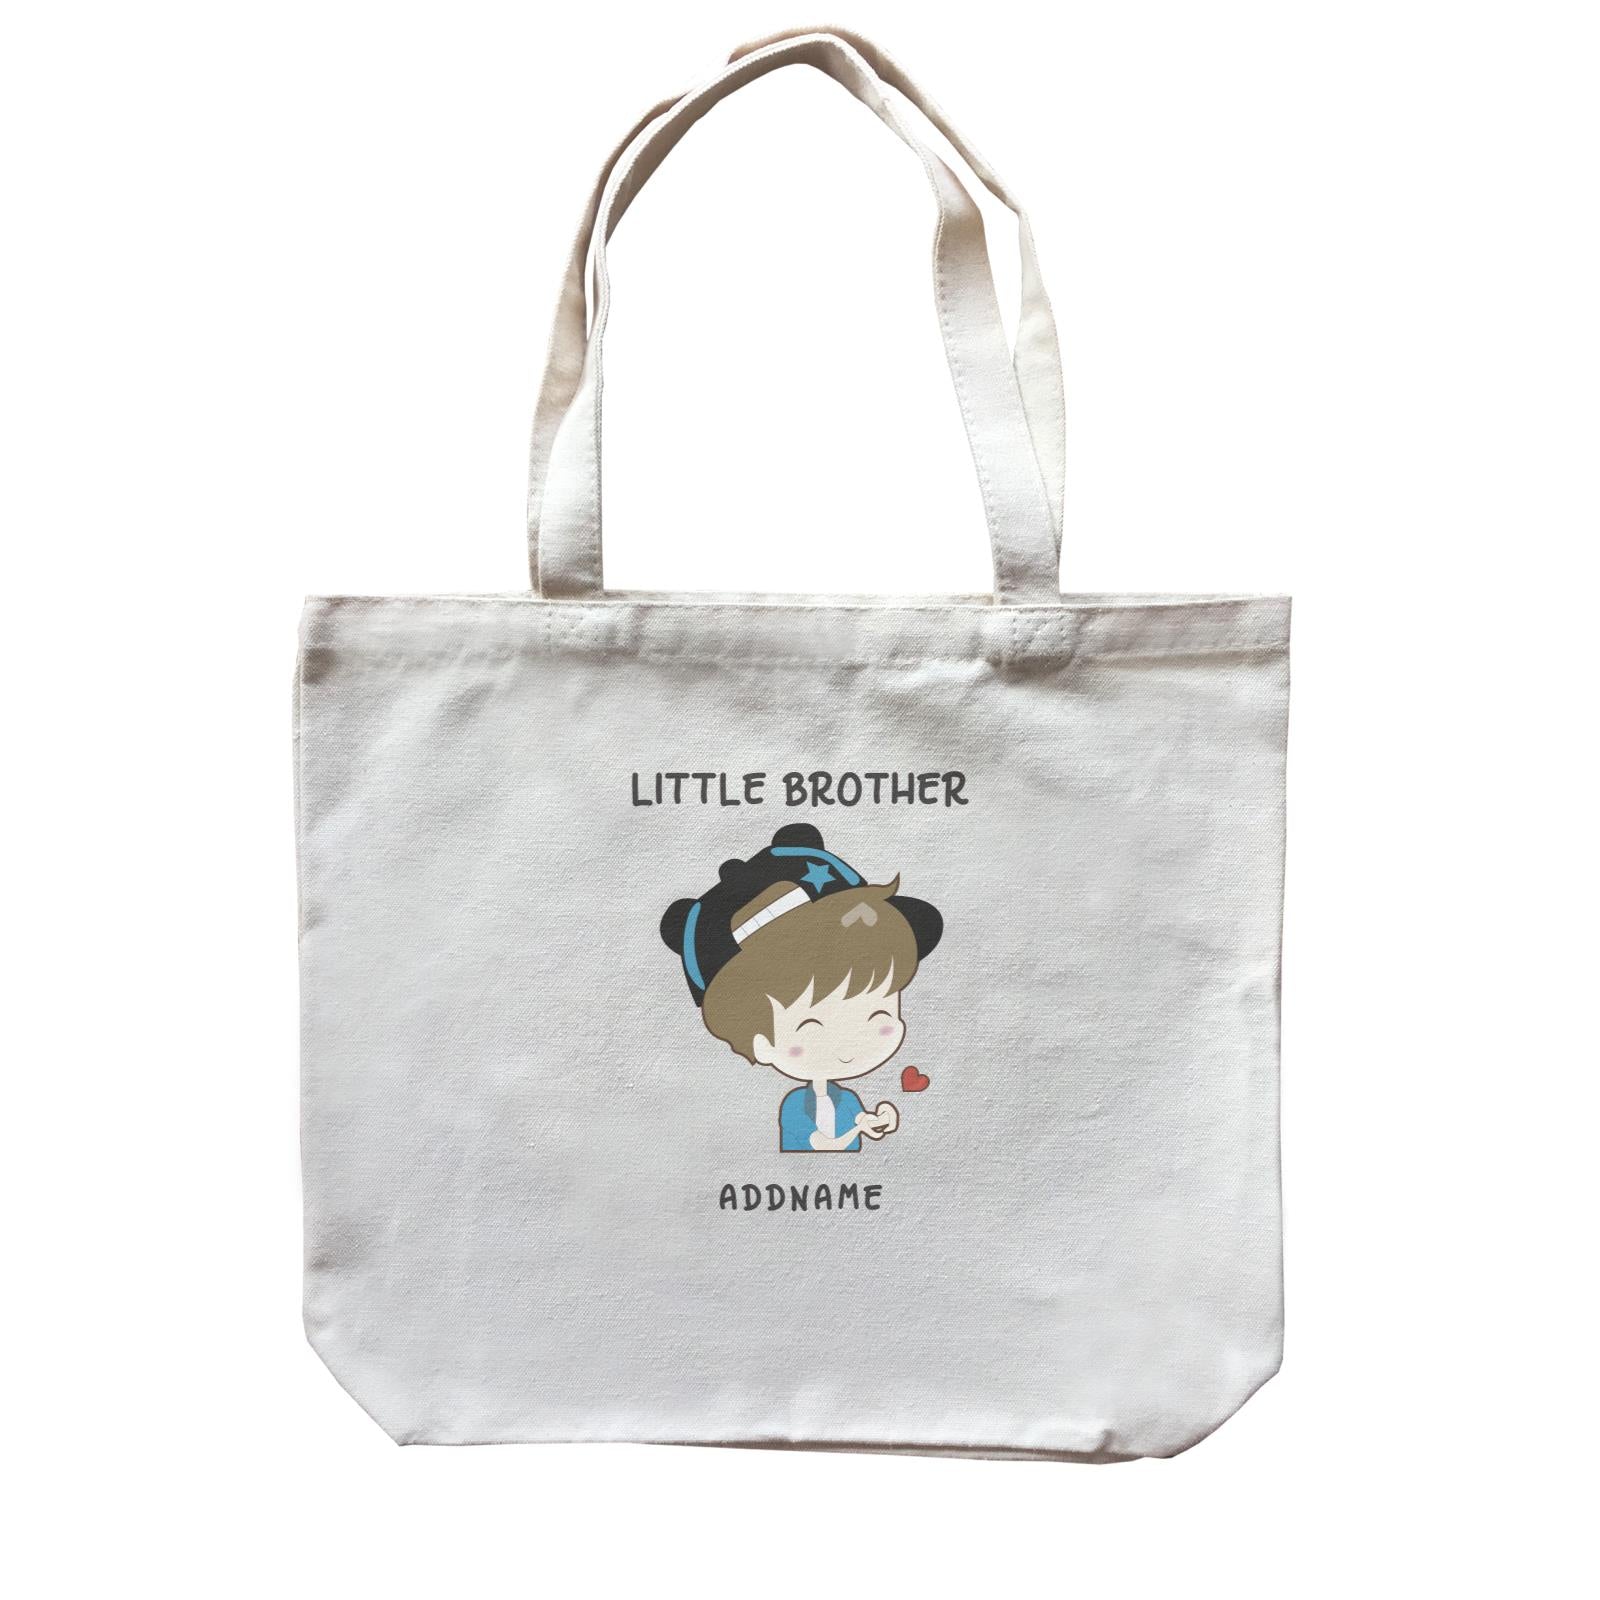 My Lovely Family Series Little Brother Addname Canvas Bag